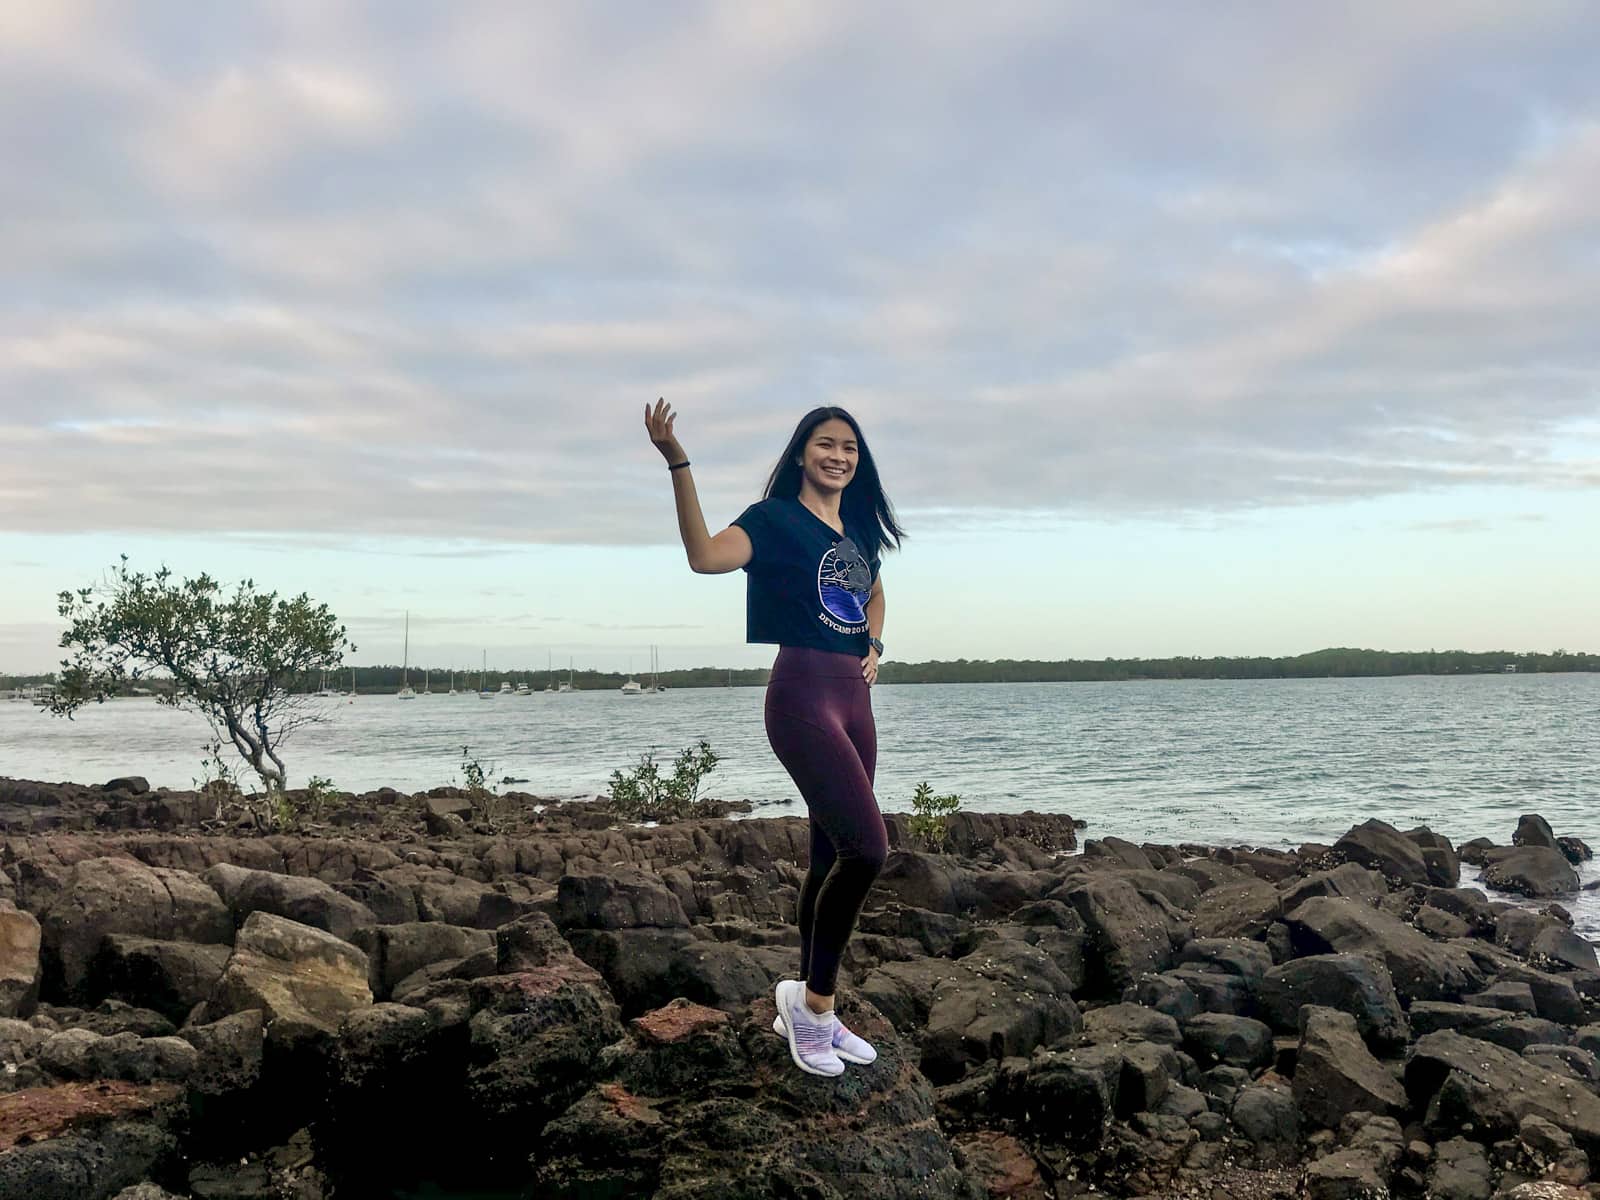 A woman wearing dark red leggings, a cropped tee and white shoes, standing on rocks by the sea. One of her hands is up in the air with her palm towards the sky, her other hand on her hip.